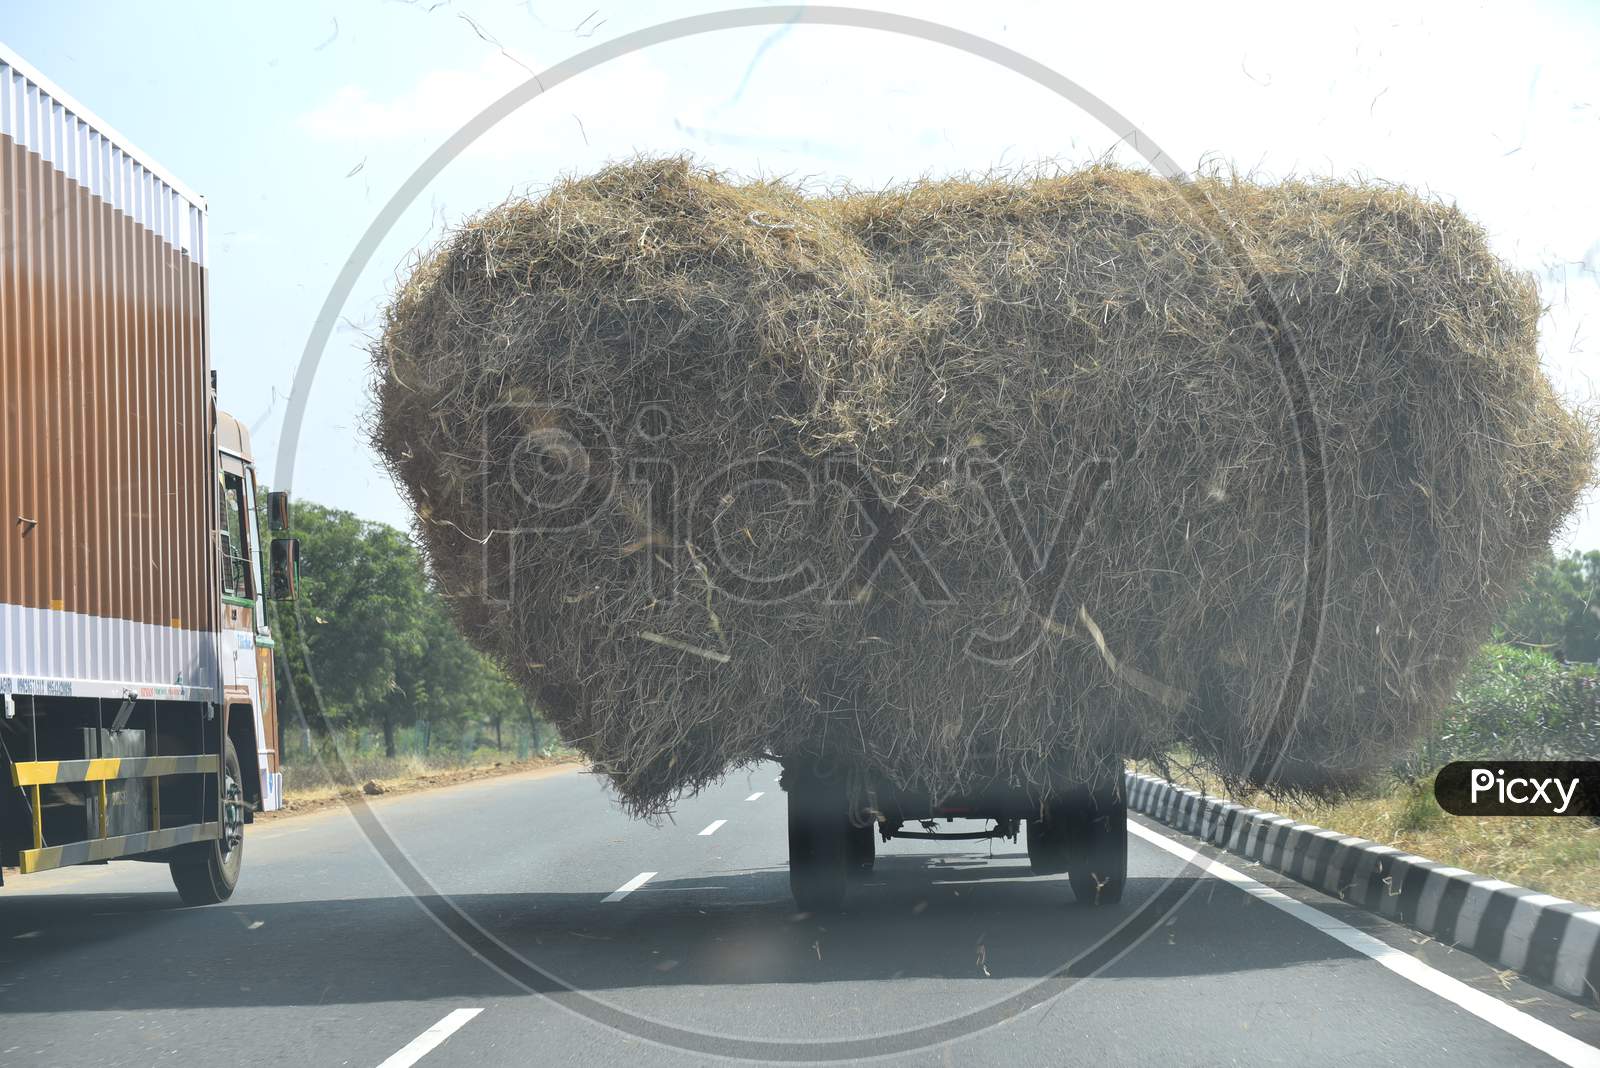 Hay carrying Tractor